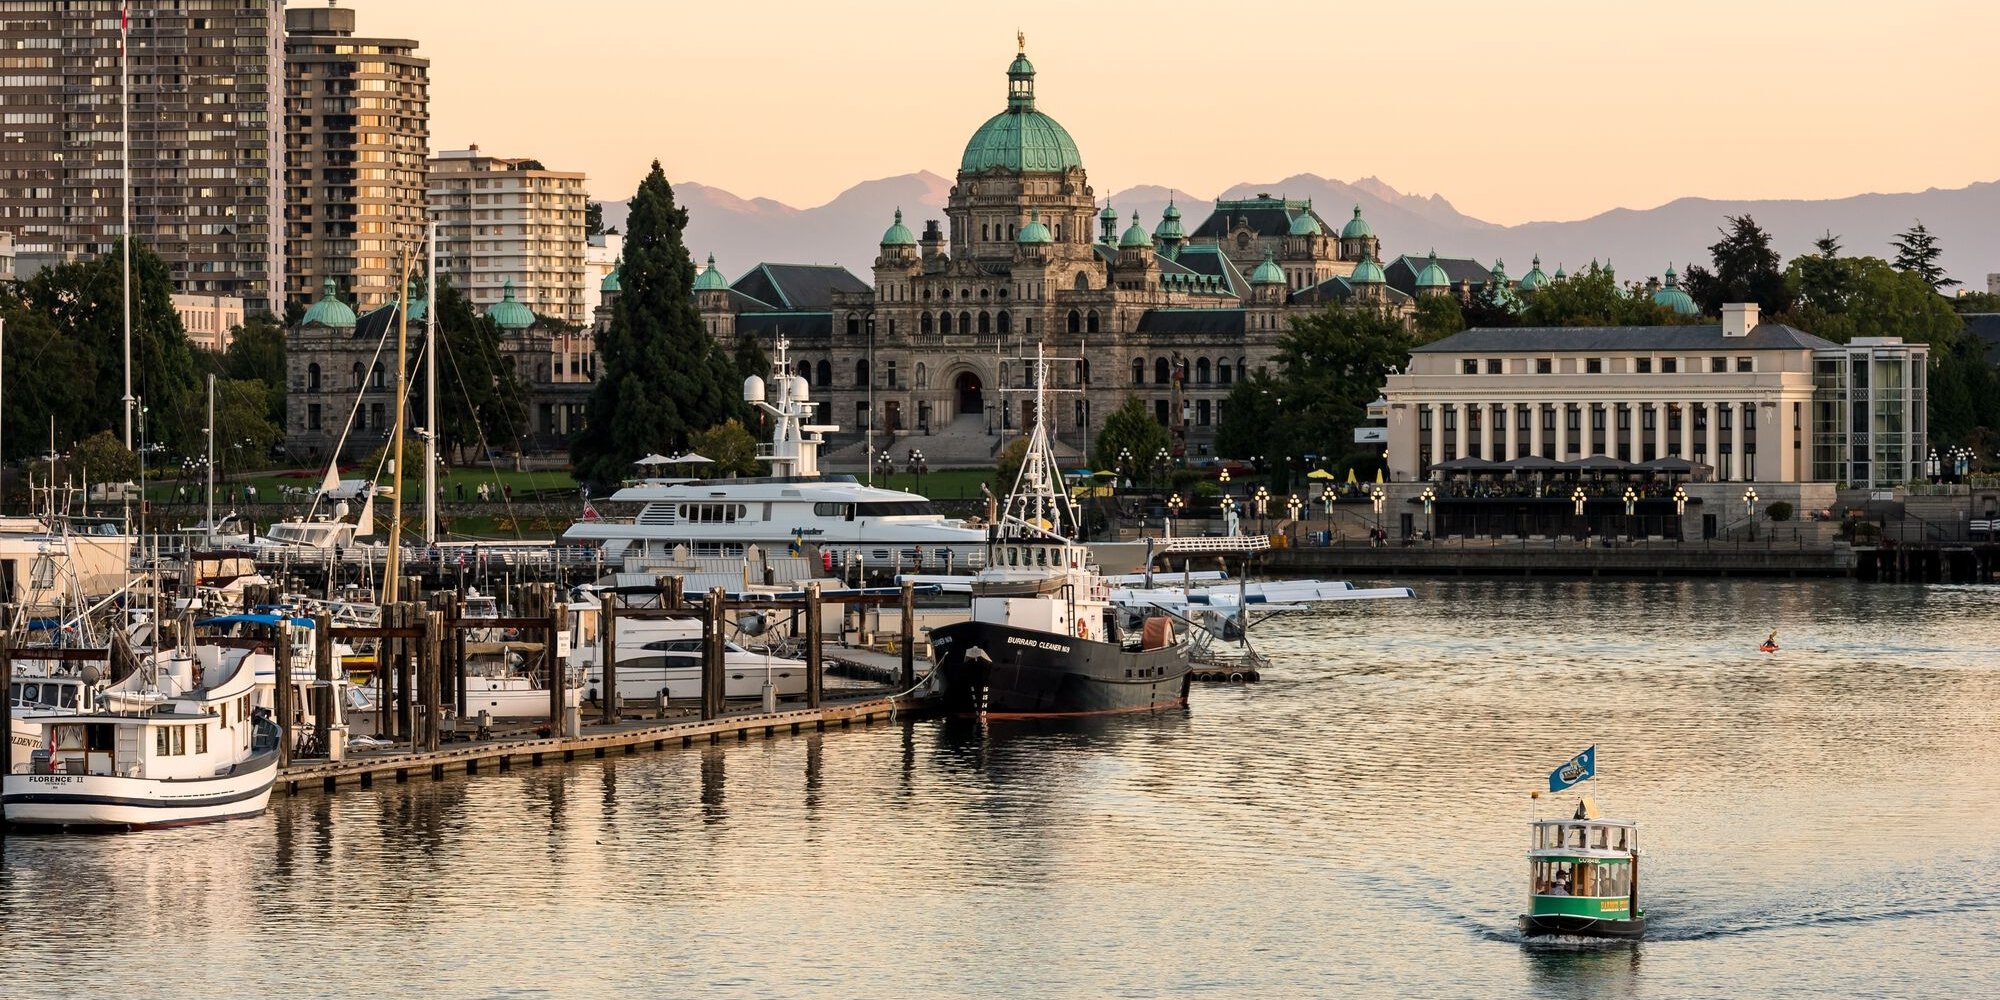 A water taxi moves through the water on the right with a marina on the left of the frame. Buildings are visible in the background, including the intricate legislature.